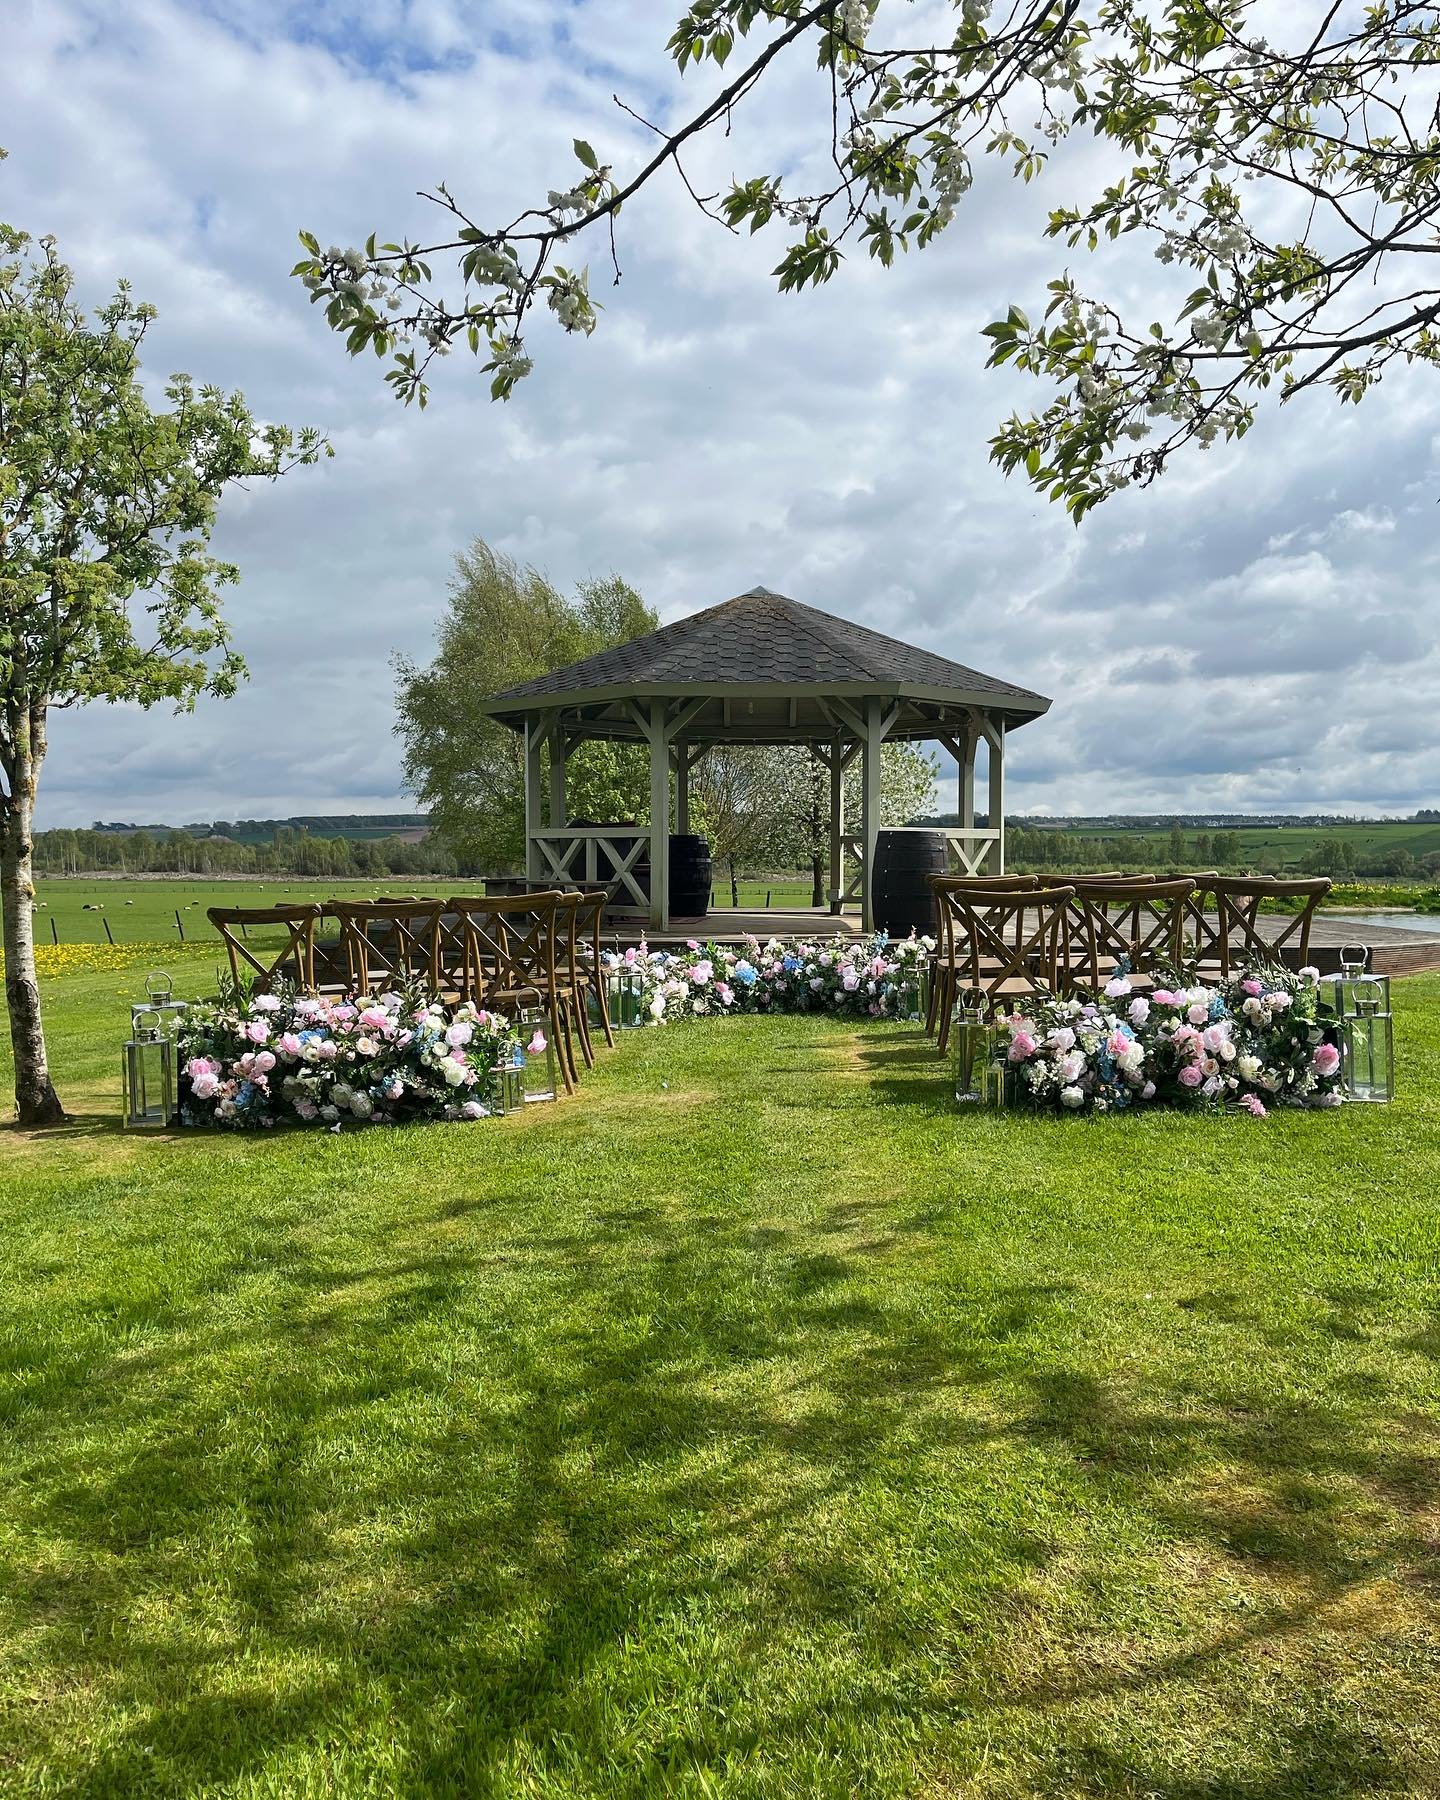 The warmer weather meant outside set ups for Bachilton&rsquo;s open day last Sunday! 🌸 

We LOVE the friends inspired sofa area infront of the pond and private couples are in the gazebo! What beautiful photo opportunities ✨💖

Thanks to the wonderfu